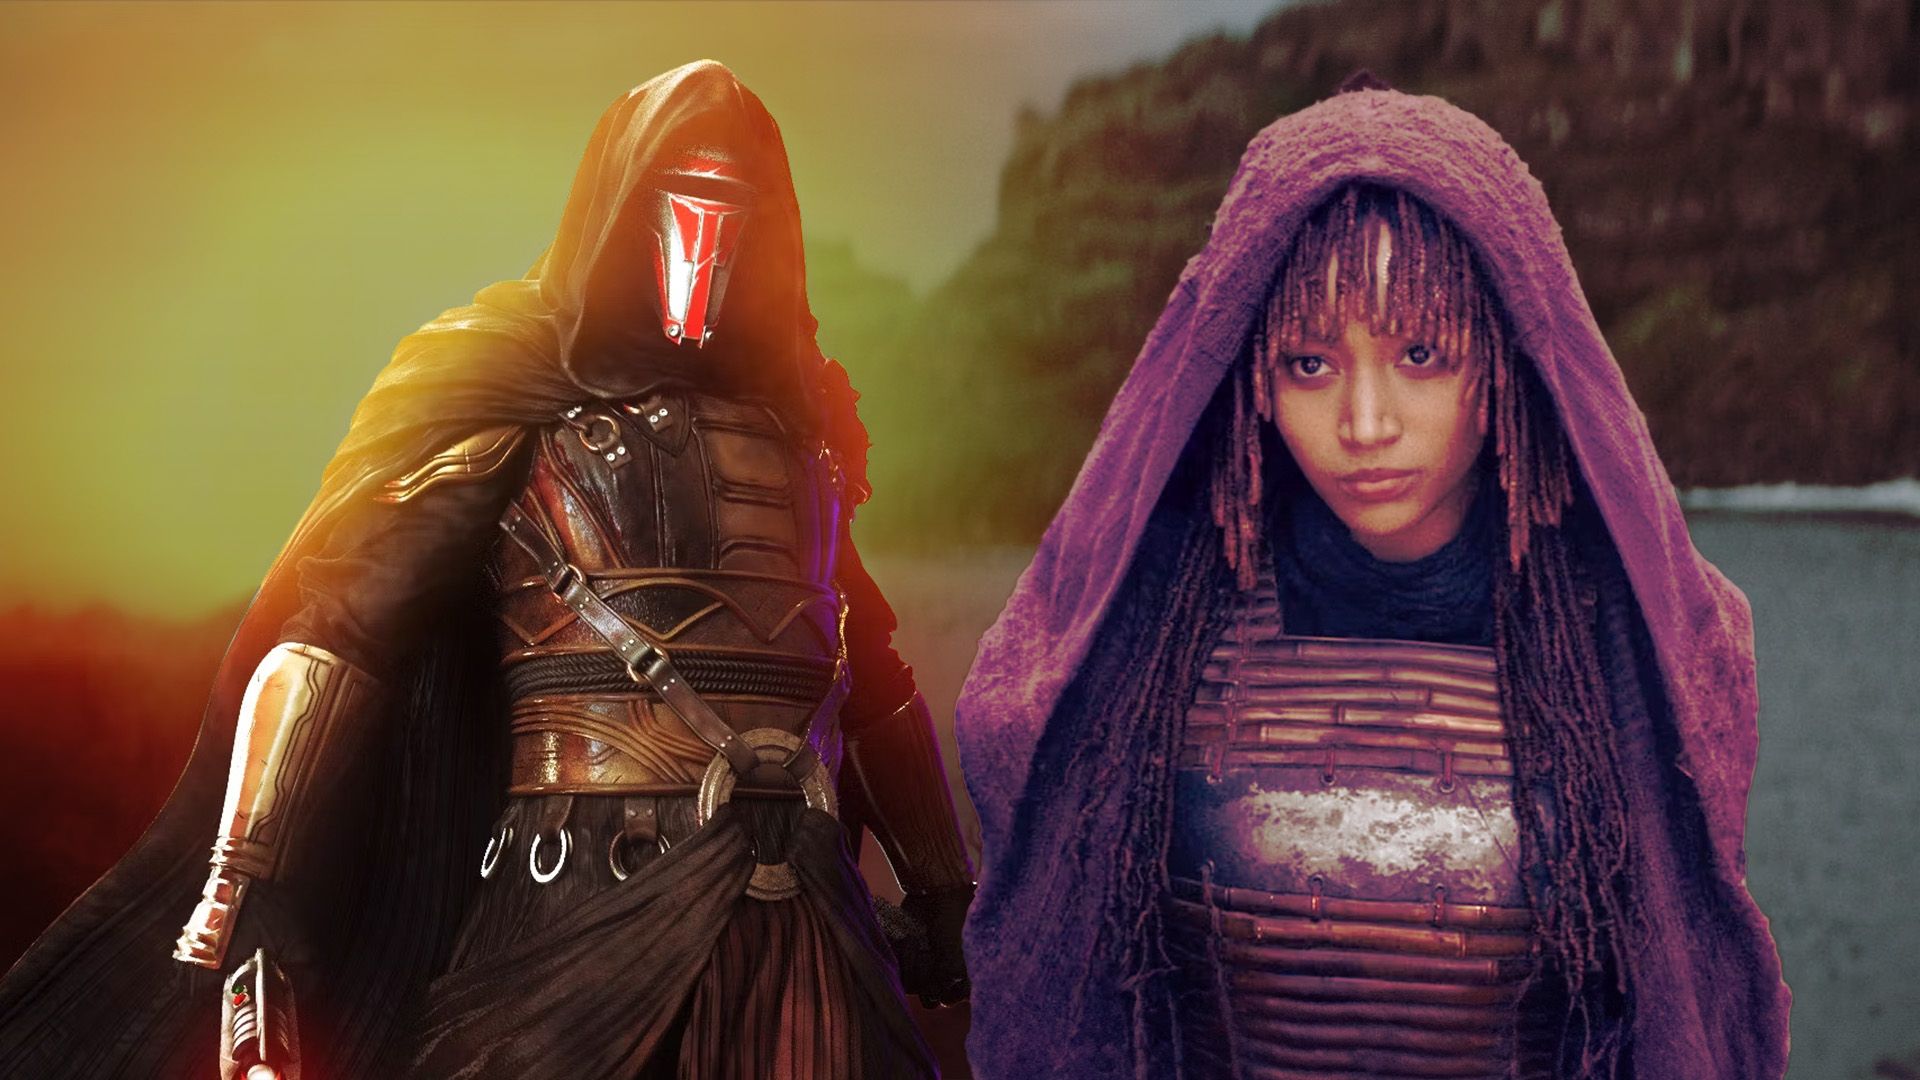 Amandla Stenberg as Mae wearing a dark hood in The Acolyte next to Revan from Knights of the Old Republic